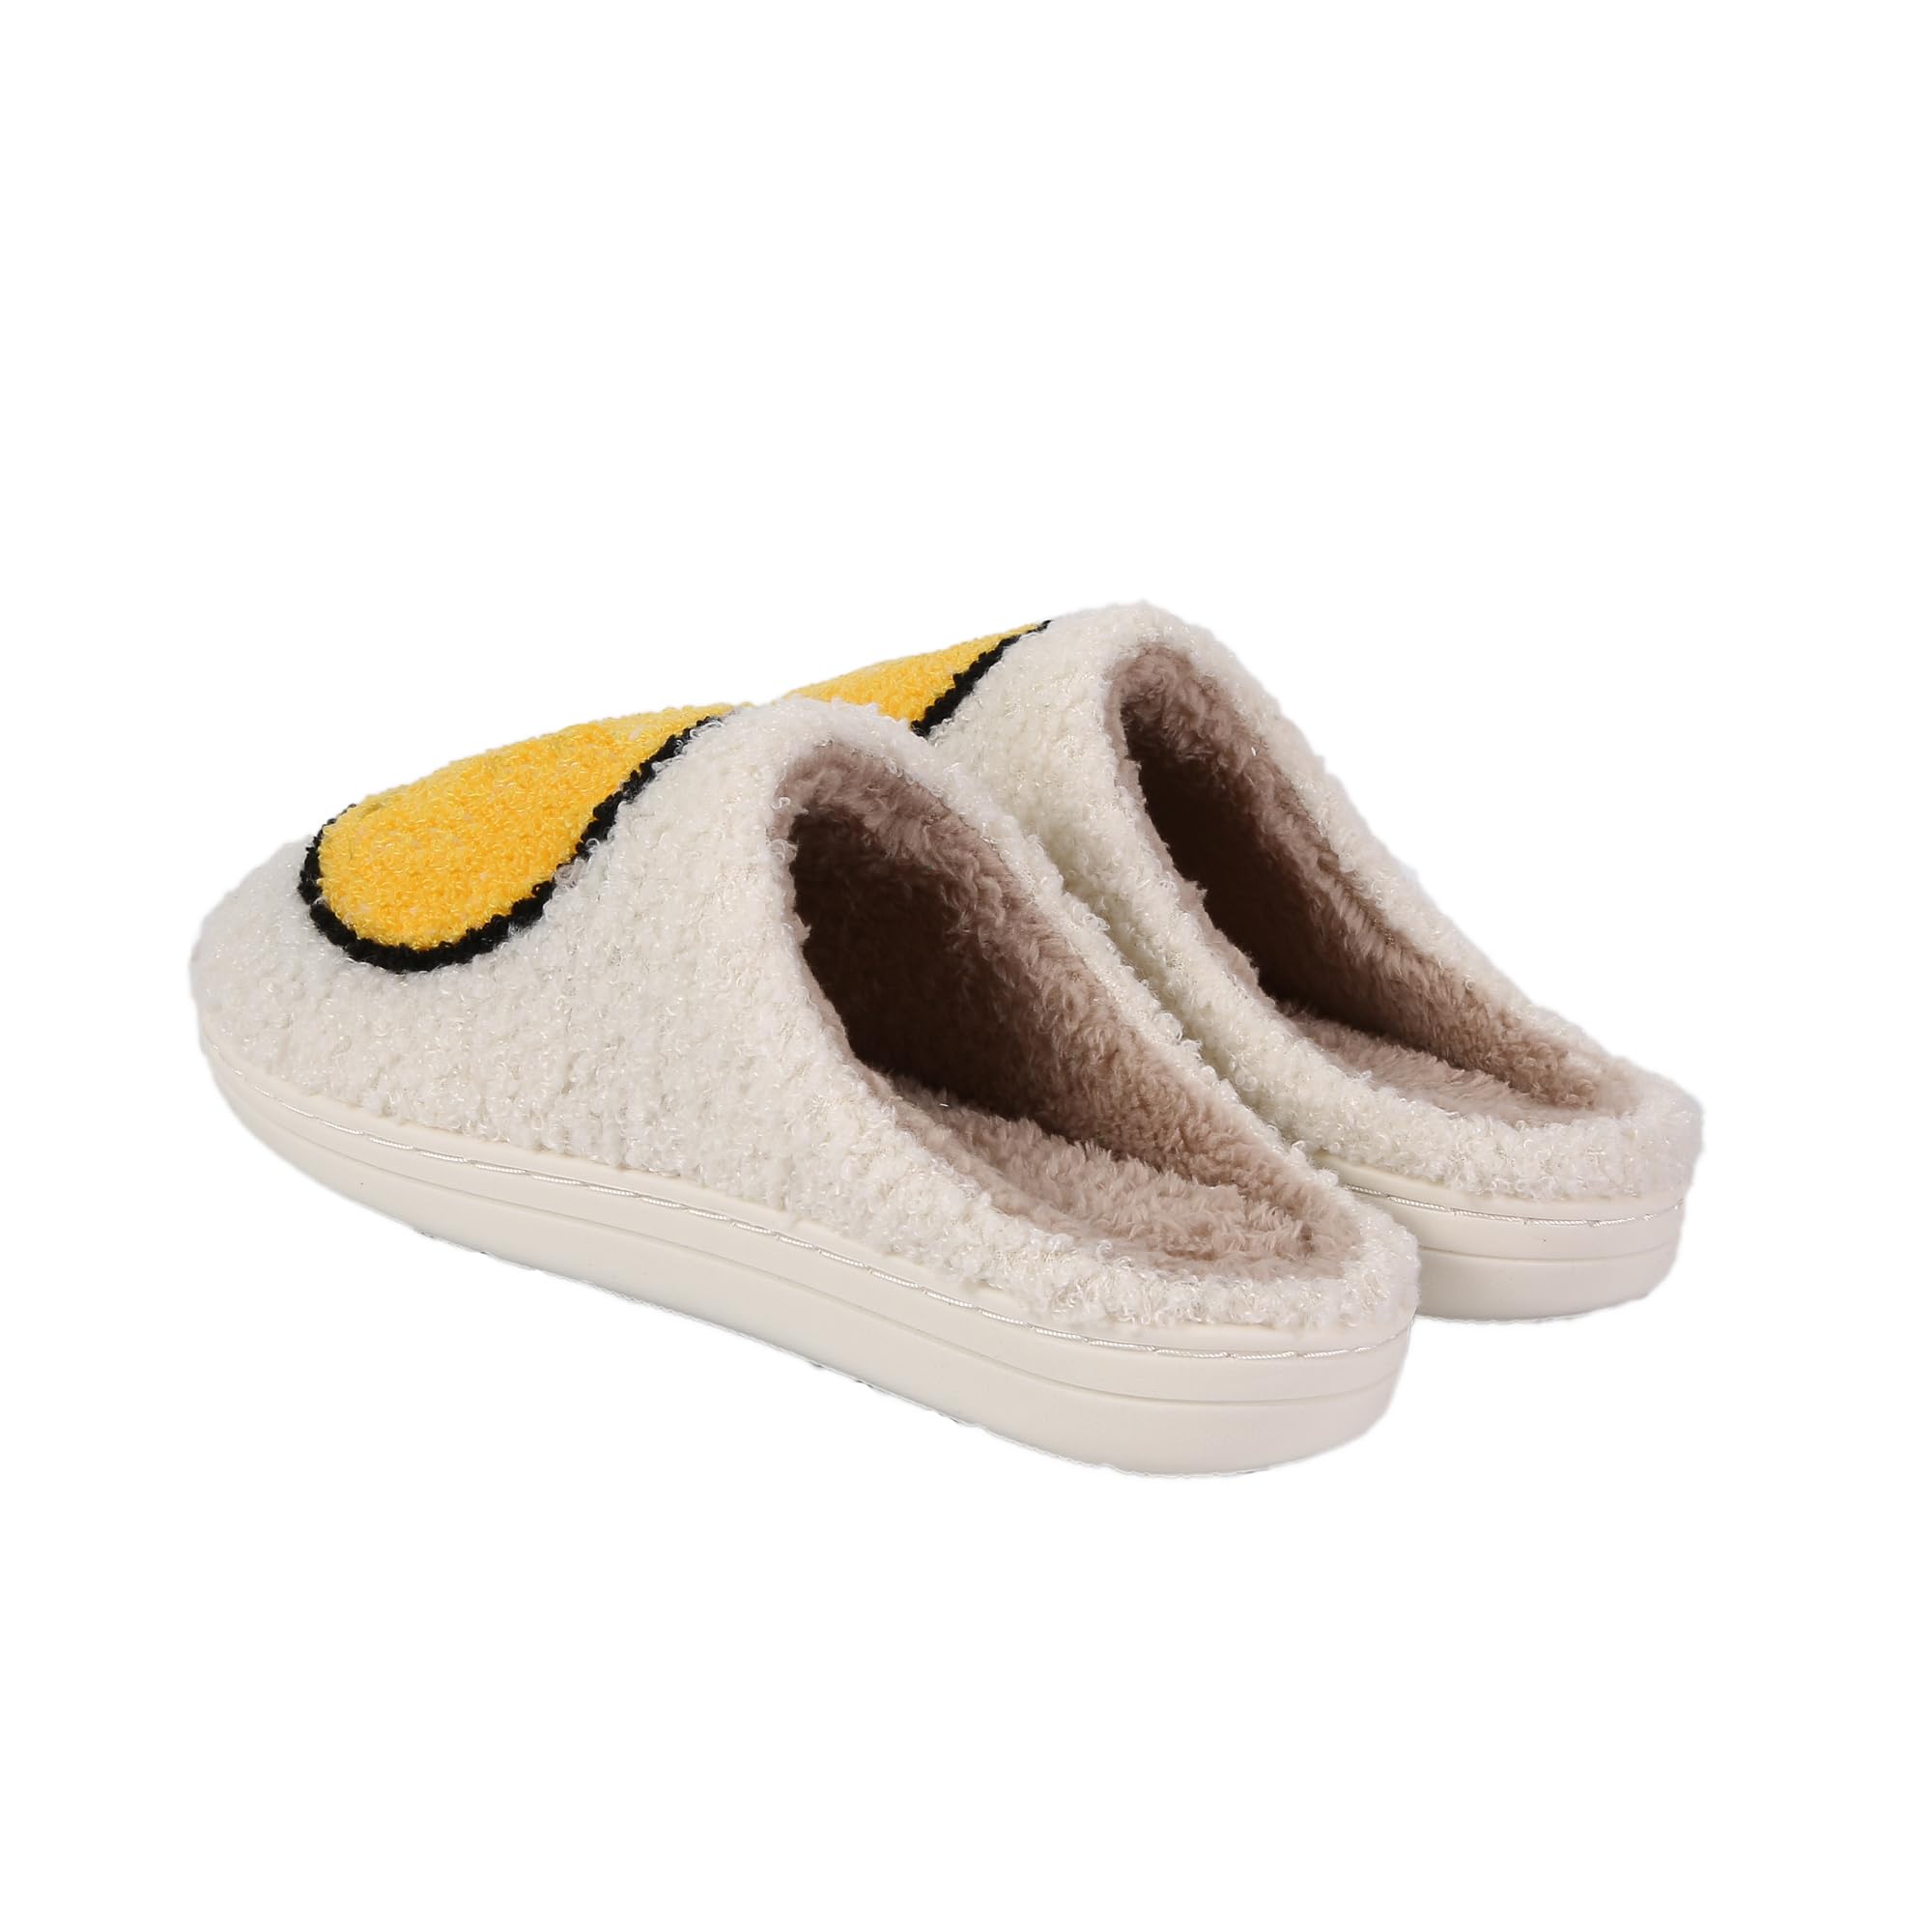 Smile Face Slippers for Women Men Soft Fuzzy Comfy Warm Thick Sole Slip-on Slippers, Plush Retro Cute Cloud Happy Face House Slippers, Fluffy Home Platform Slides Shoes Indoor Outdoor(yellow,38/39)